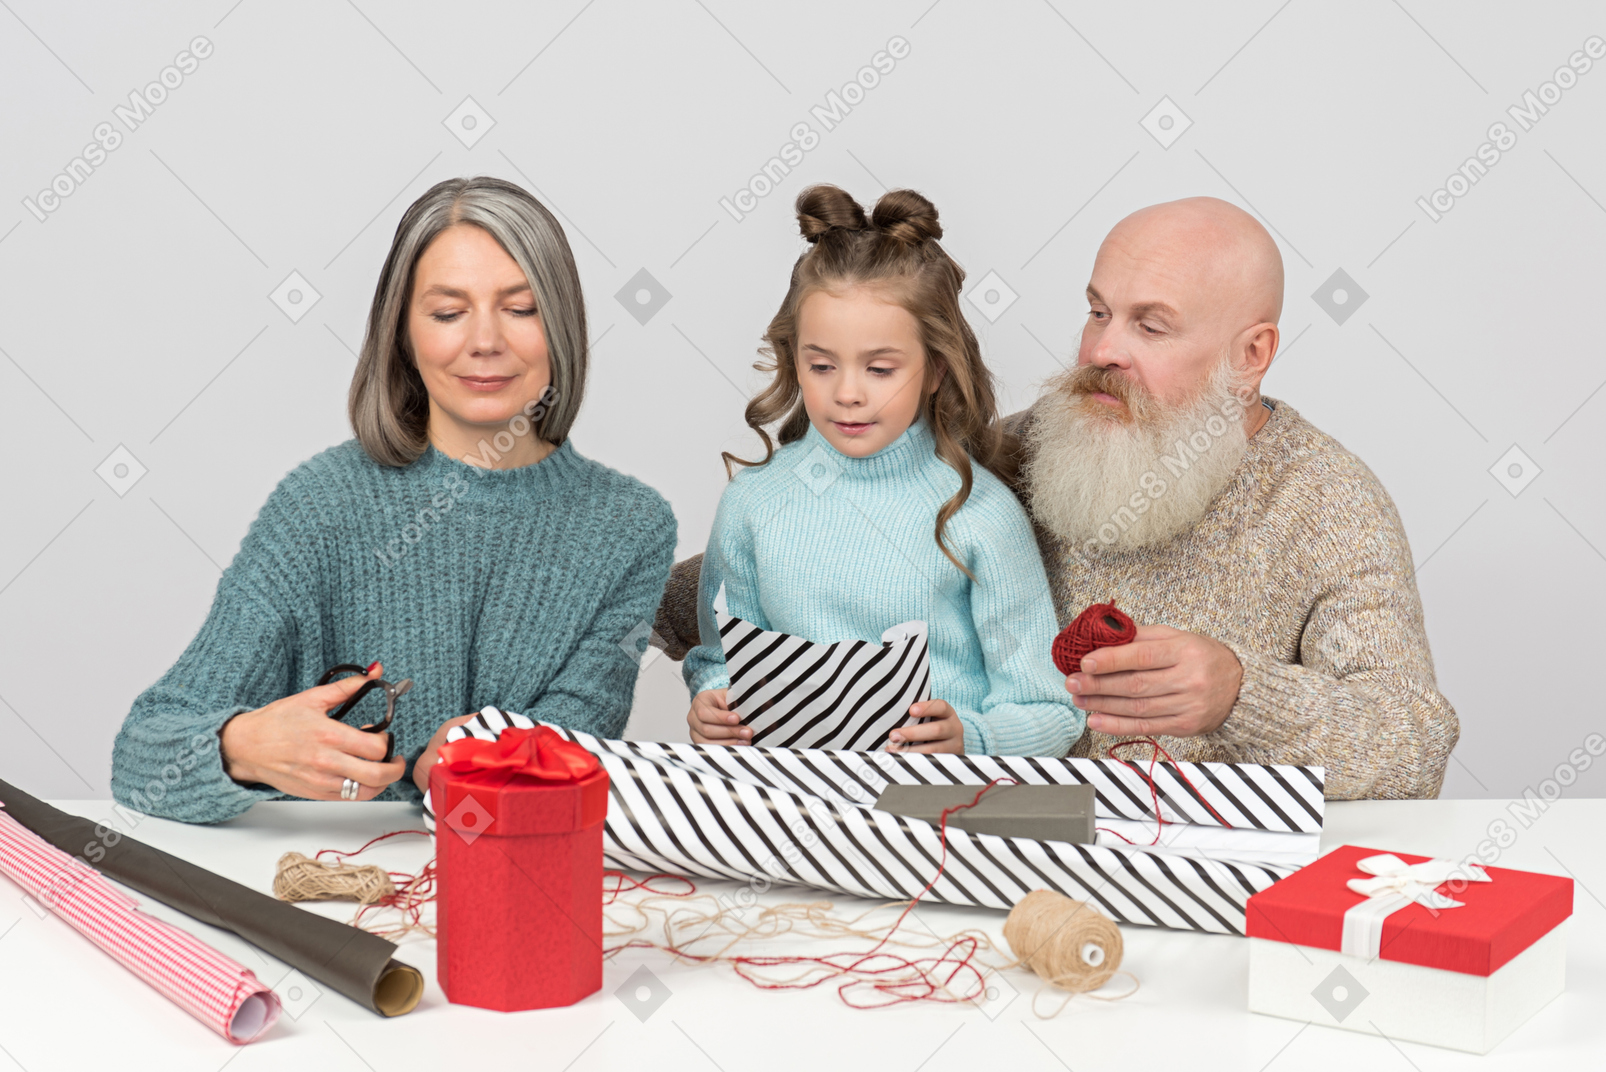 Grandpa putting christmas decor on granddaughter's hair while they wrapping presents